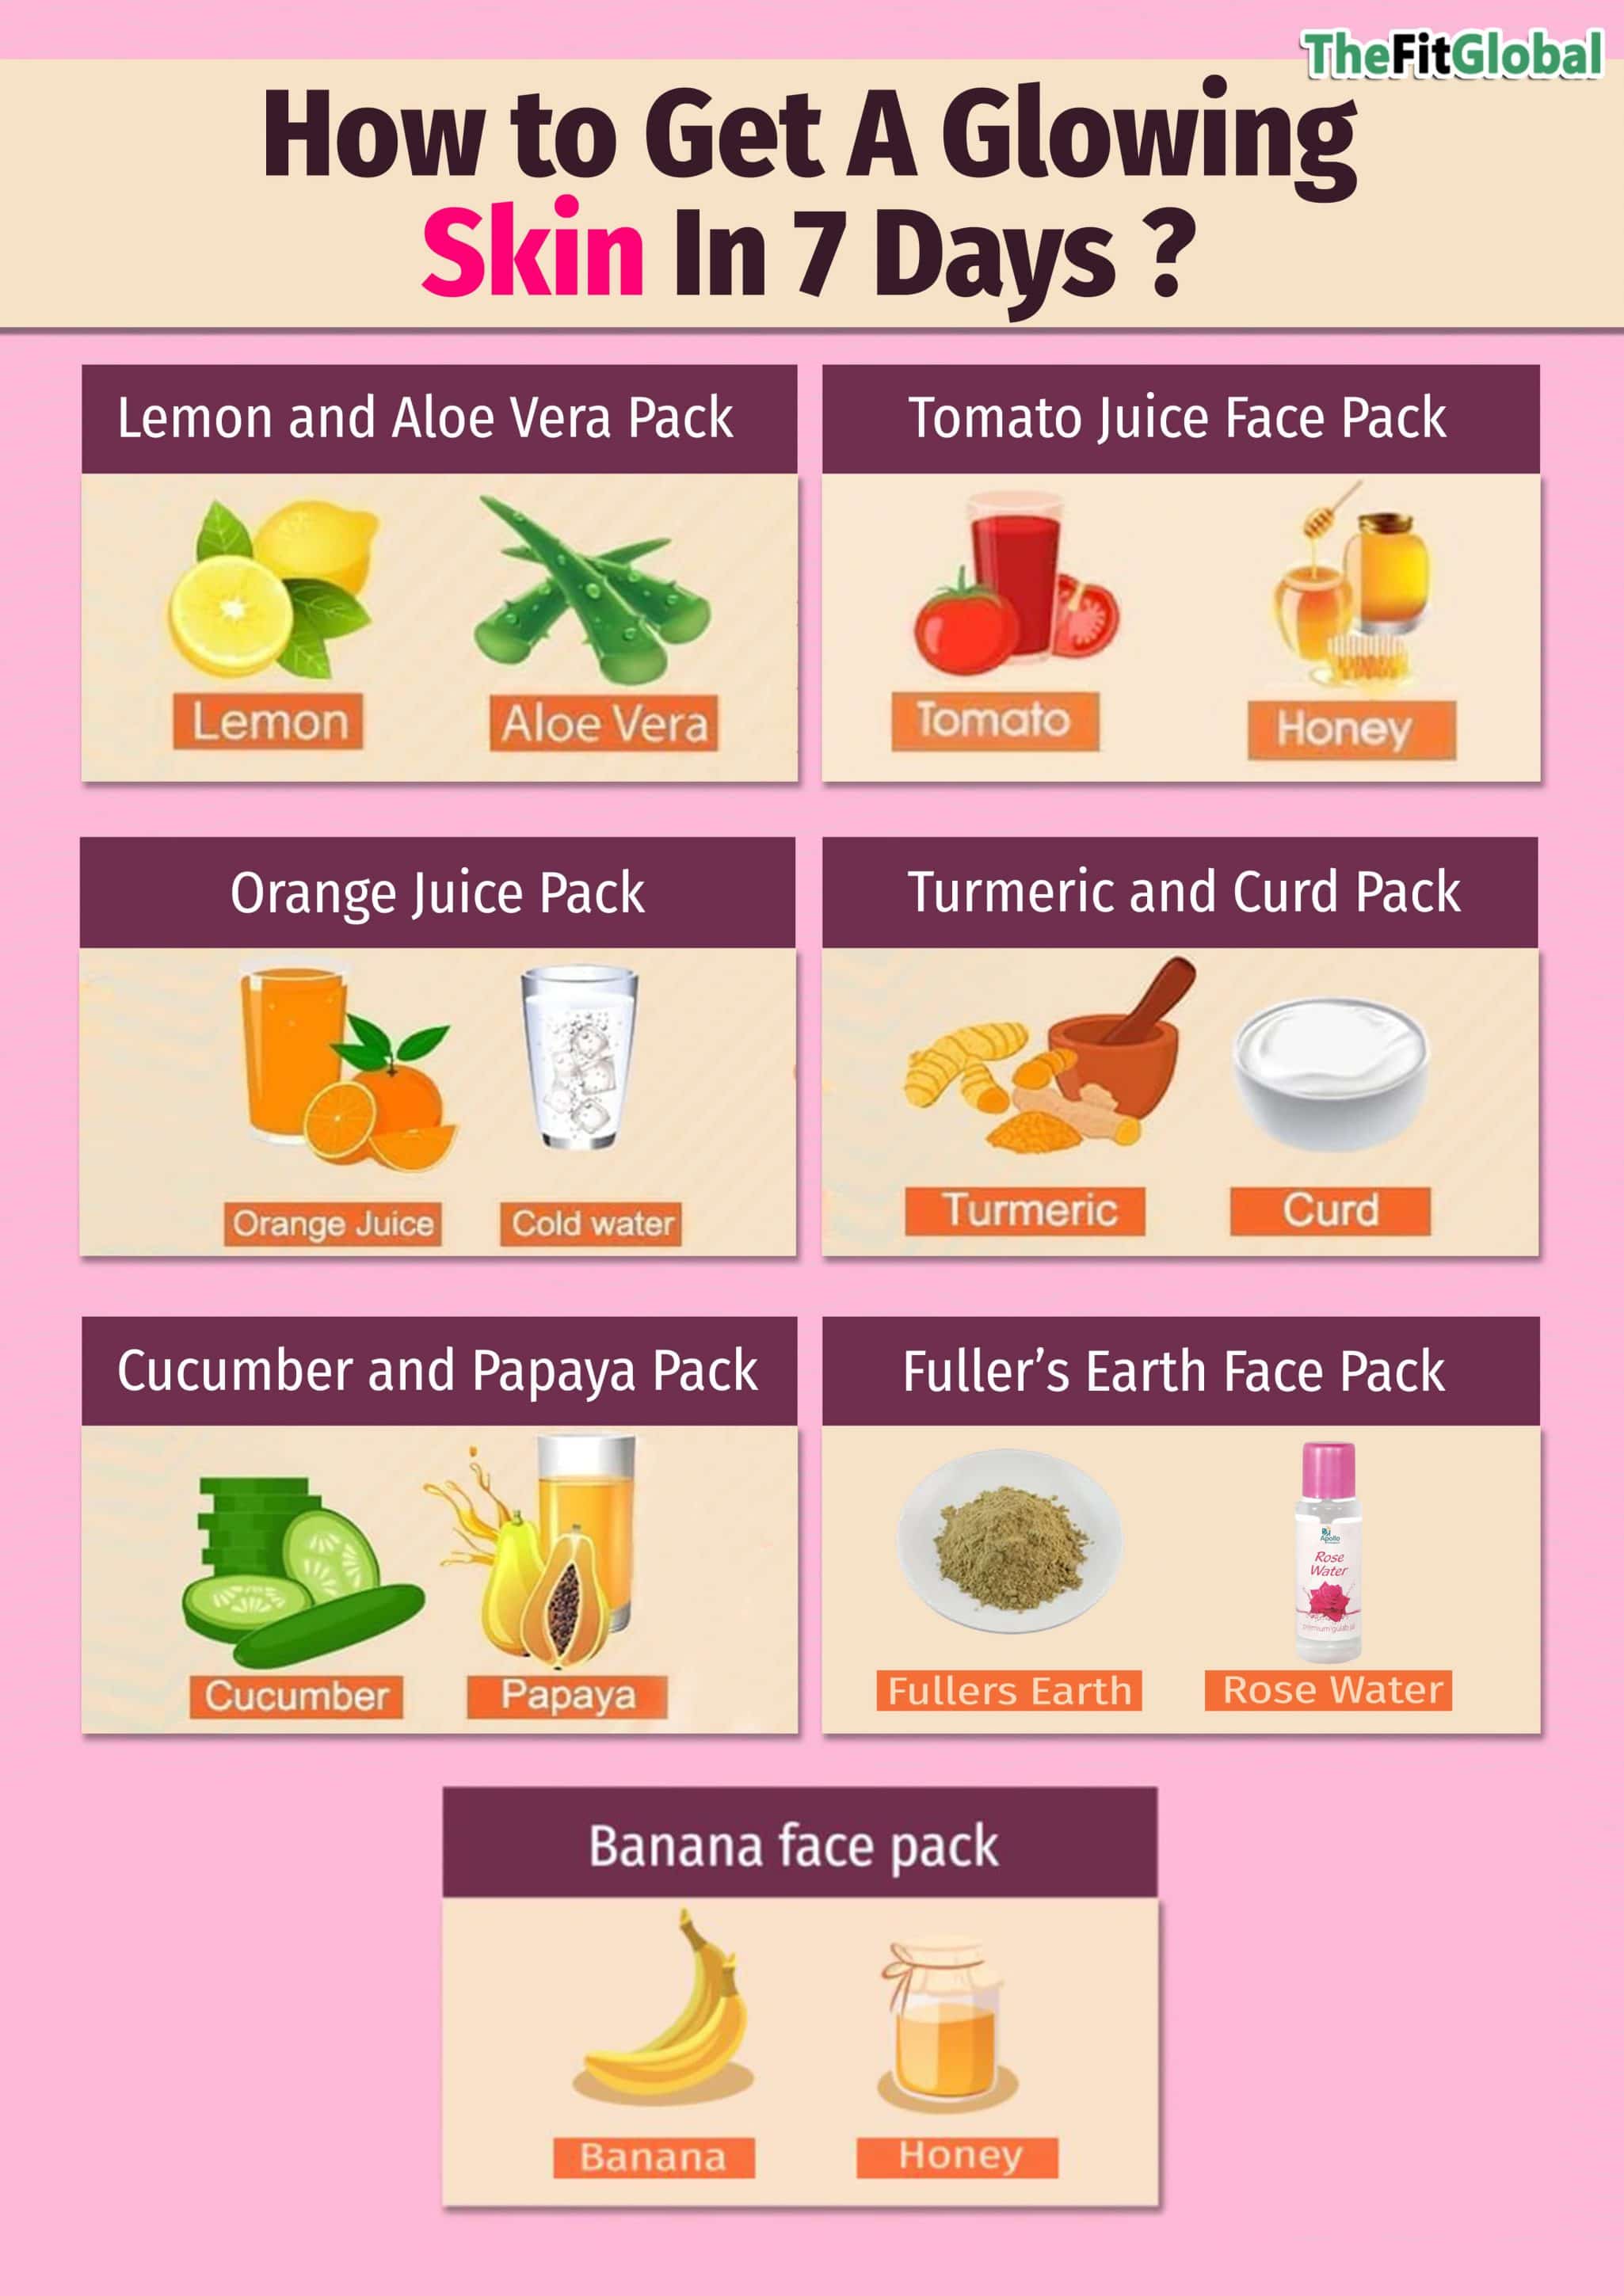 How to get a glowing skin in 7 days